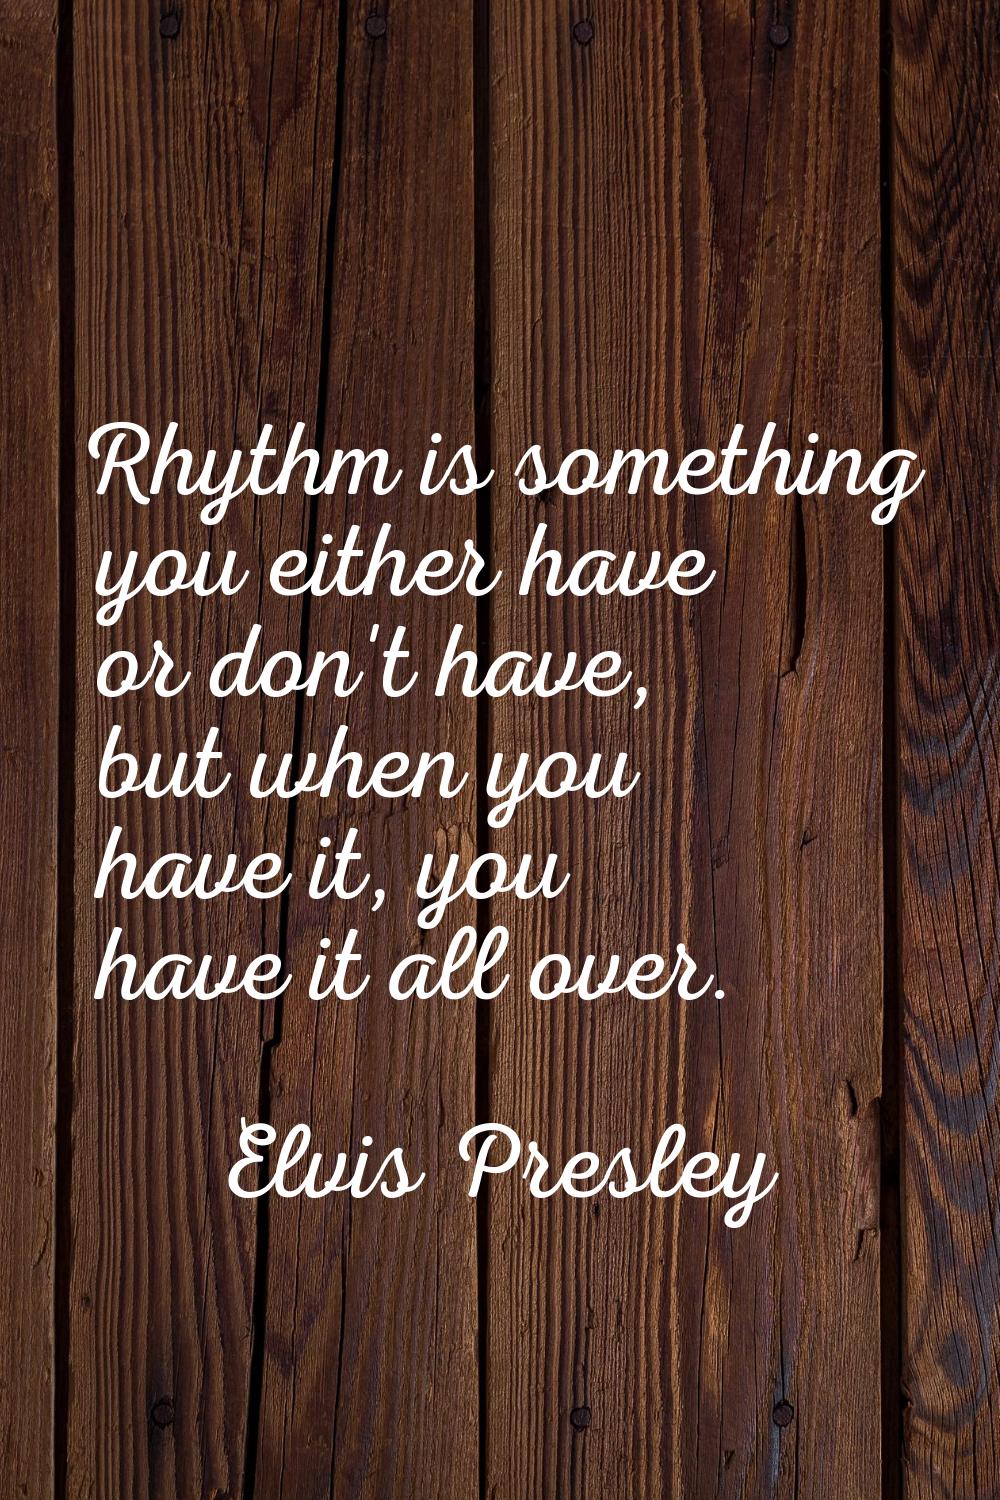 Rhythm is something you either have or don't have, but when you have it, you have it all over.